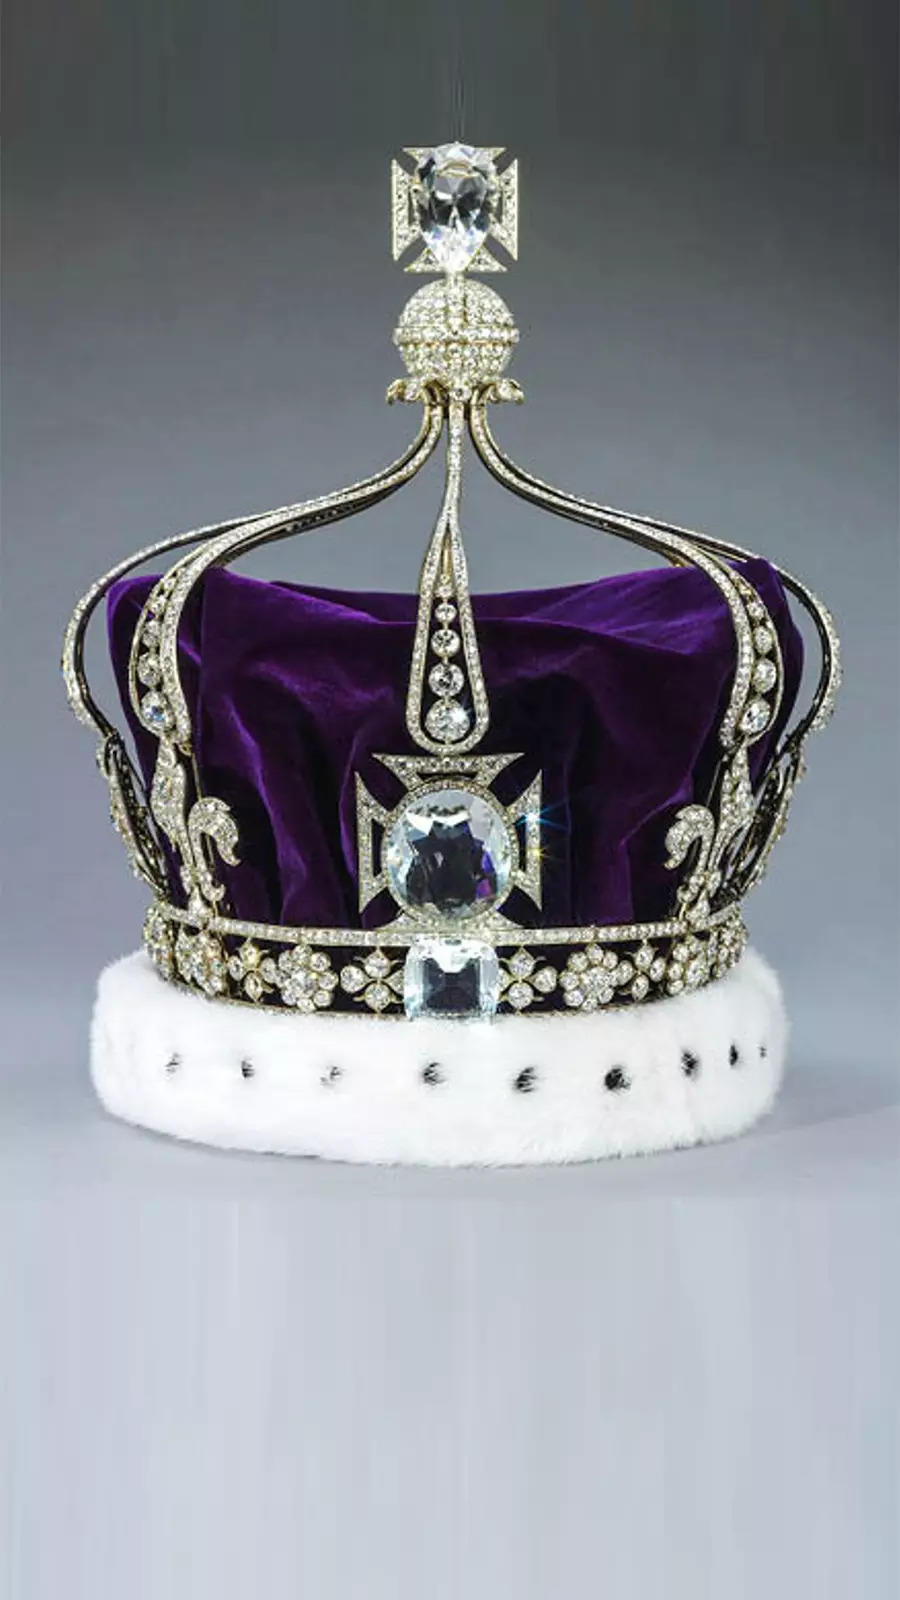 Kohinoor Photos, Images and Pictures